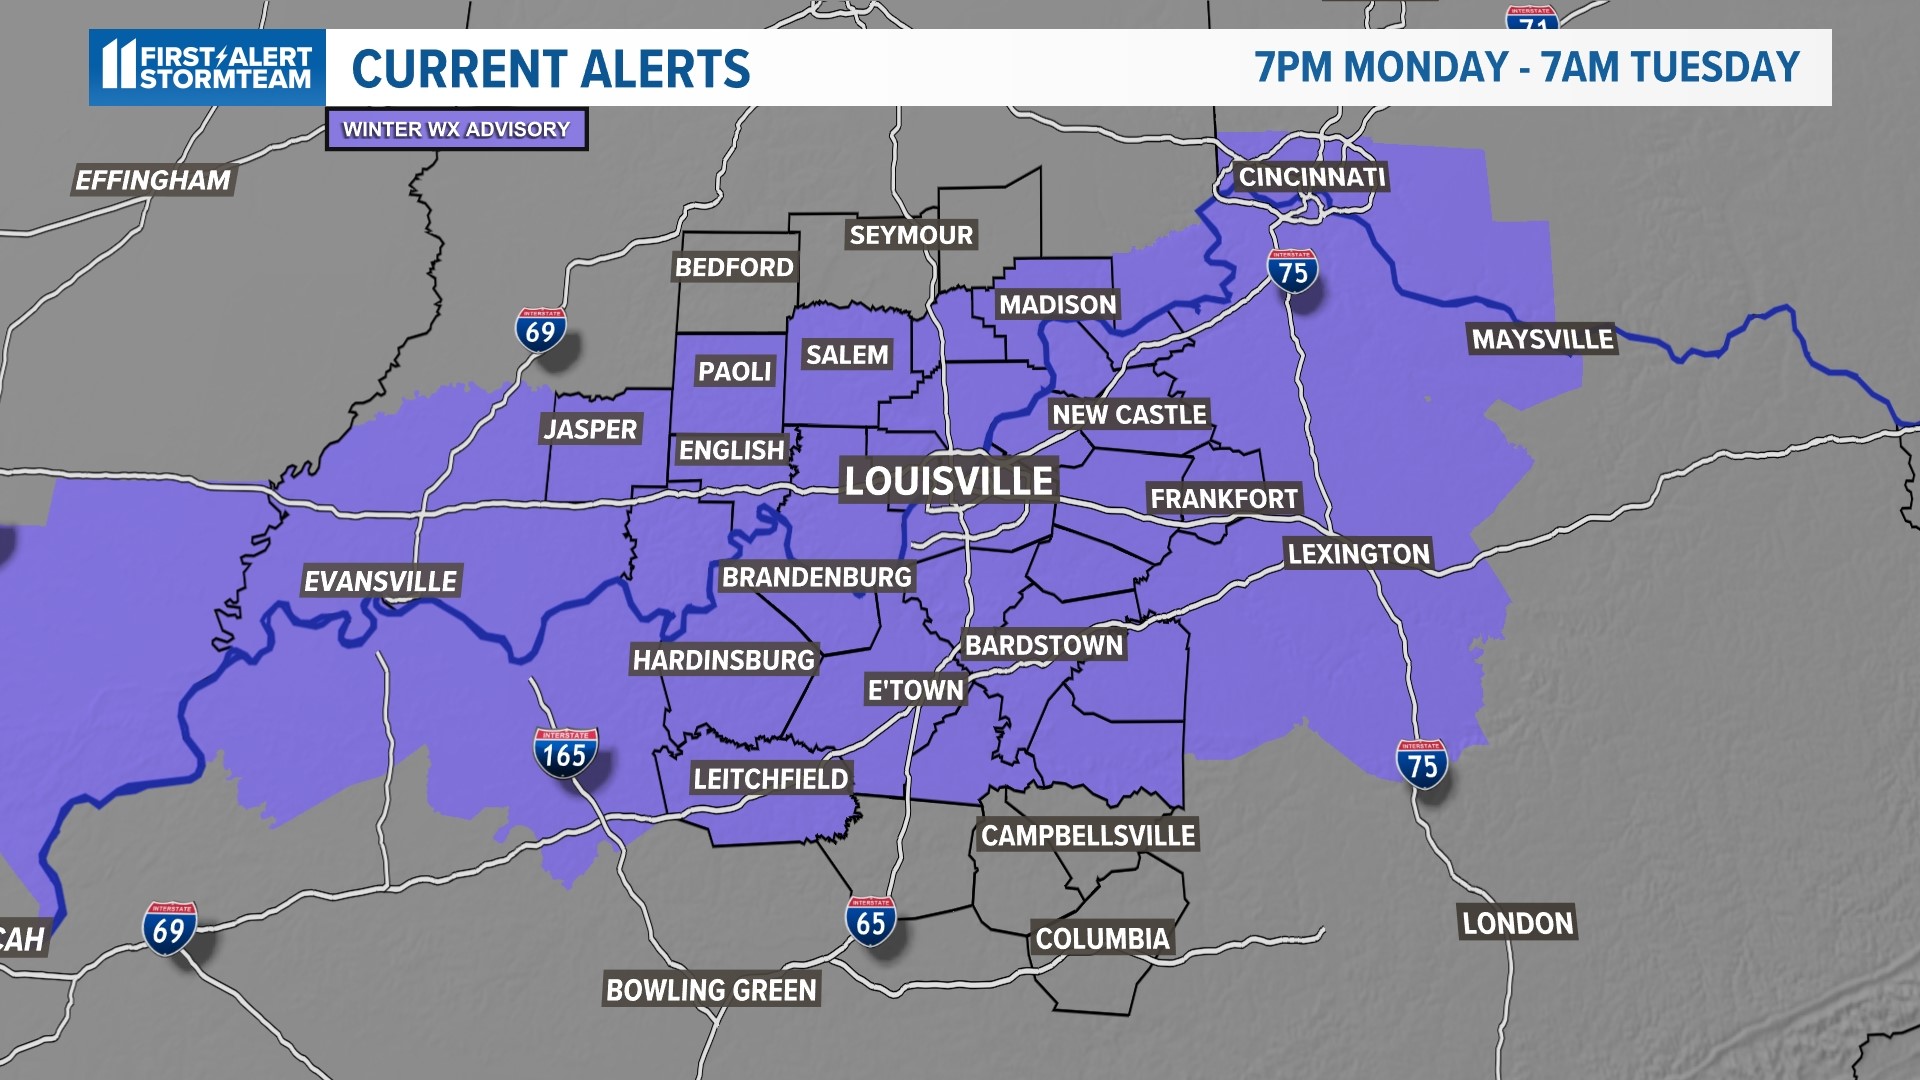 Meteorologist Alden German gives an update on the winter weather advisory issued for Louisville and southern Indiana